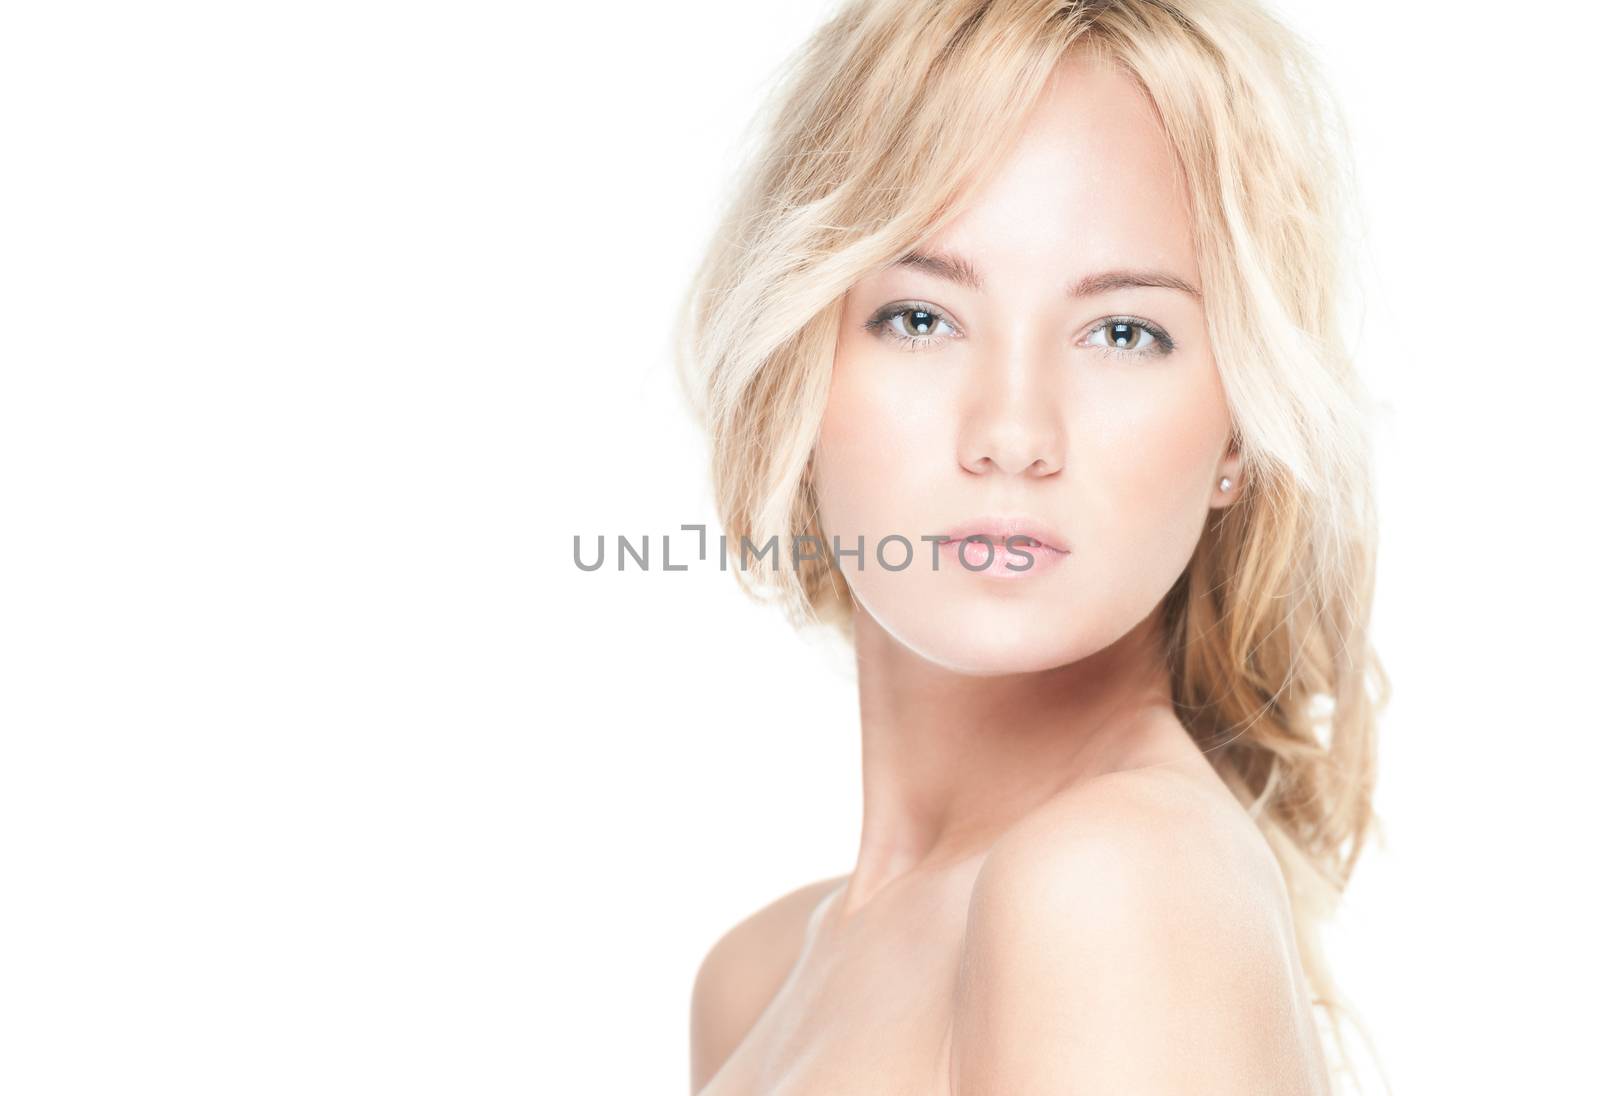 Sensual portrait of young beautiful blonde woman on white background. Sexy topless girl with curly hair looking passionate and tempting. Youth, pure natural beauty and passion.